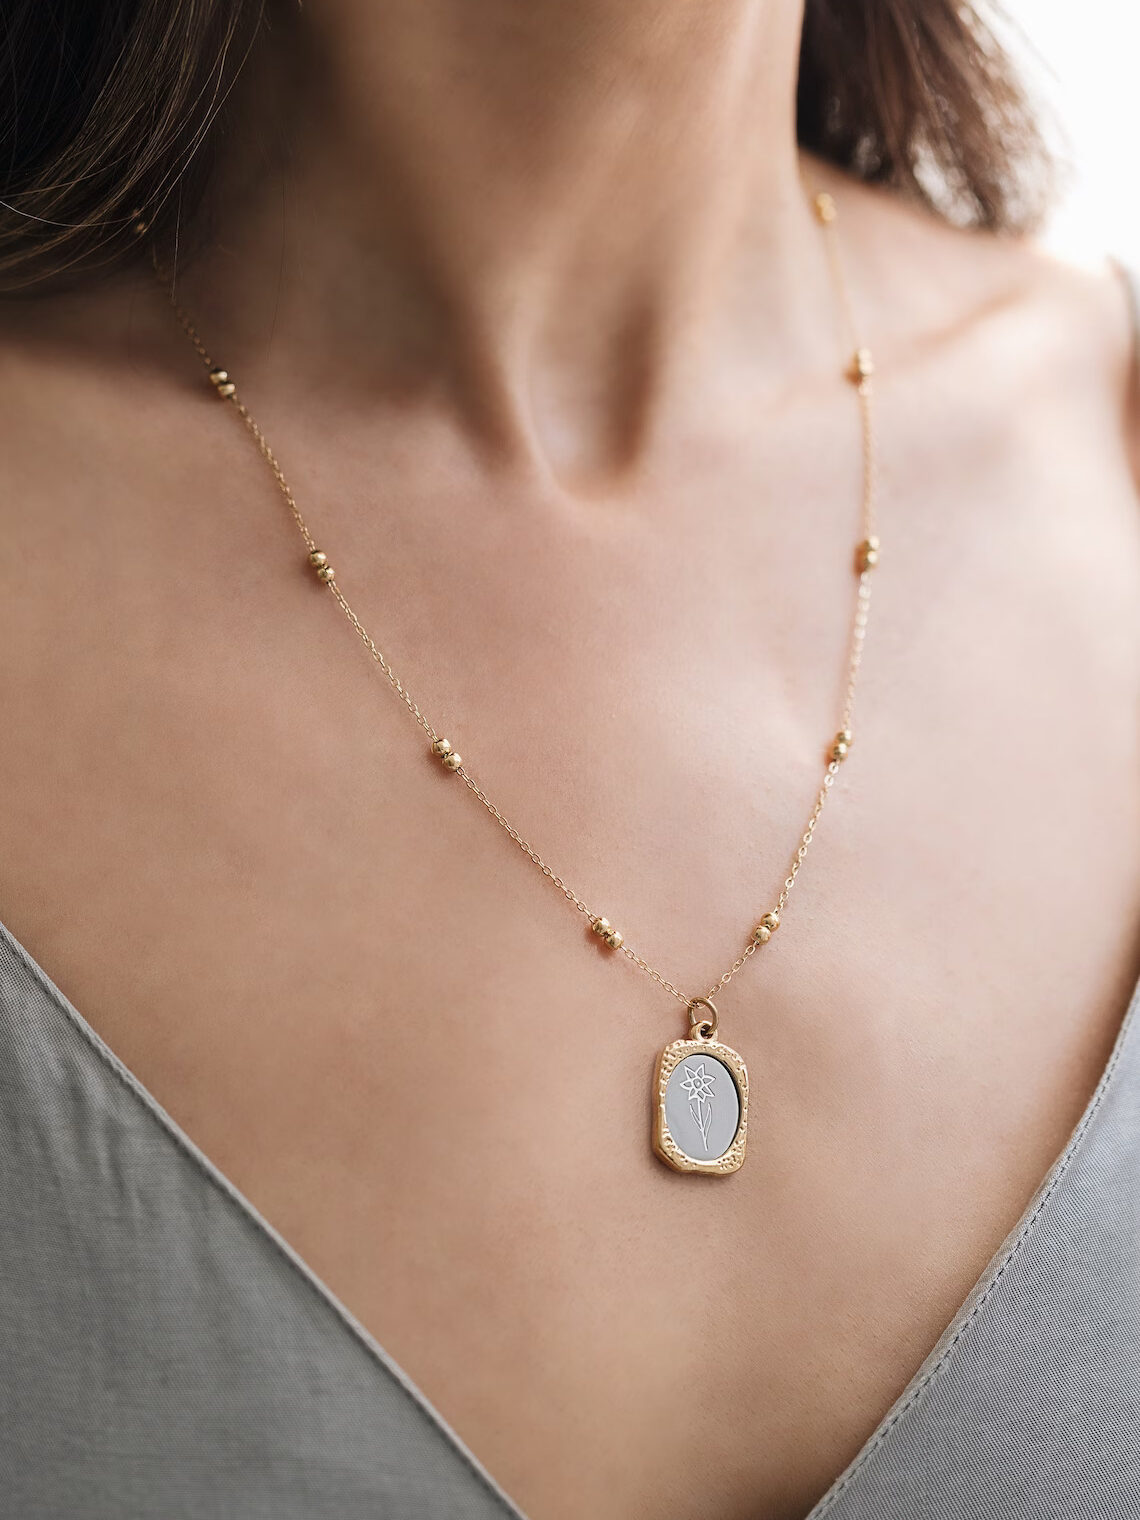 A model wearing a yellow gold pendant necklace in the shape of a rounded rectangle with a mirror in the center containing a flower engraving. Found on Etsy.